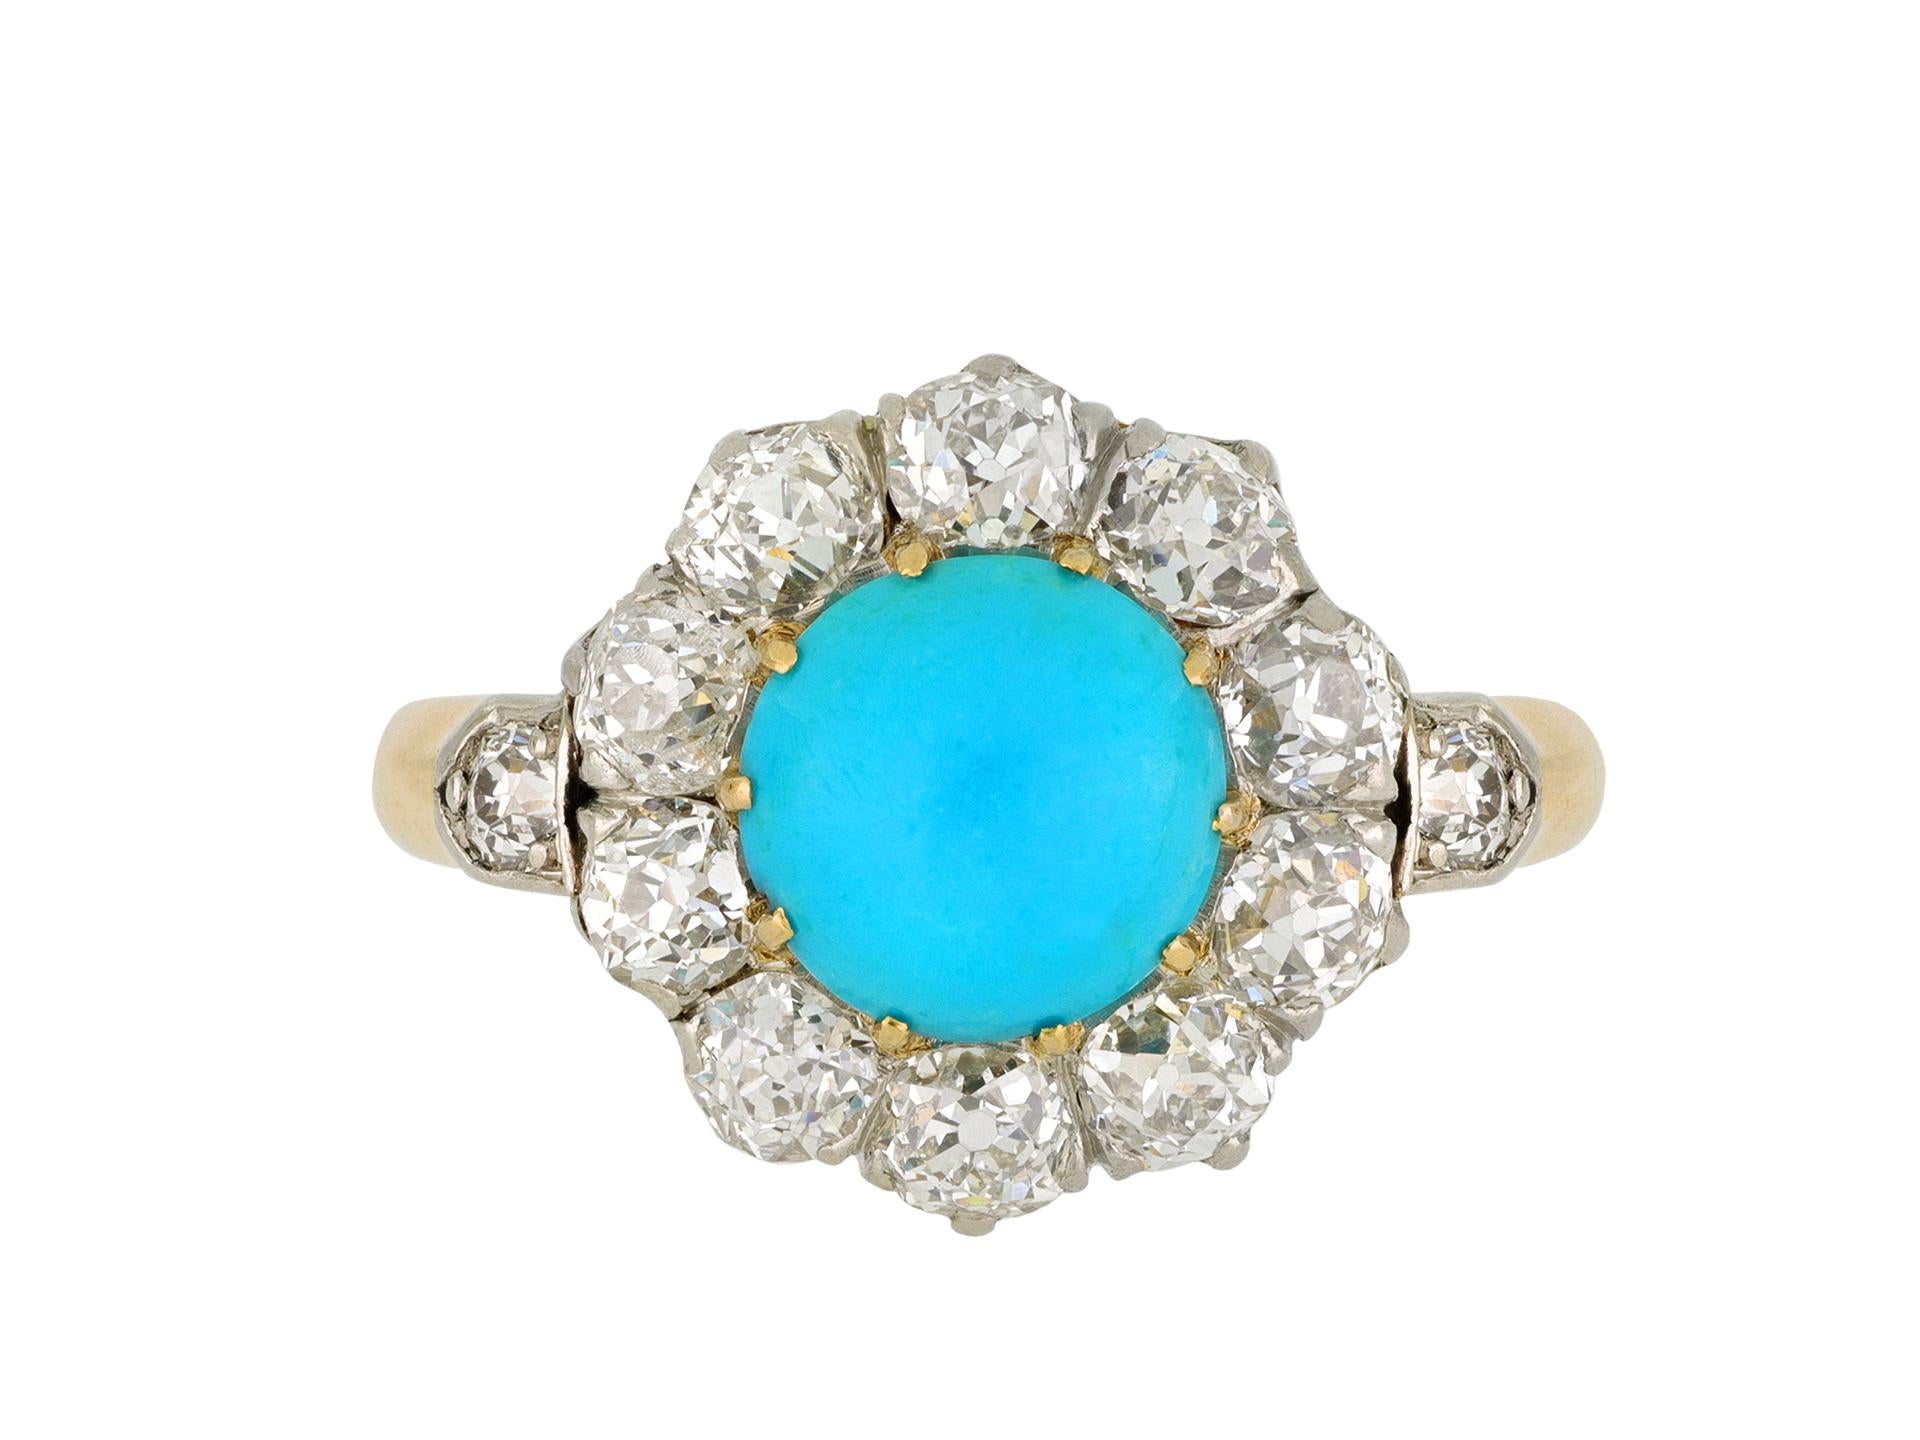 Edwardian turquoise and diamond coronet cluster ring. Set to center with a round cabochon cut natural turquoise in an open back claw setting, with an approximate weight of 1.20 carats, encircled by ten cushion shape old mine diamonds in open back